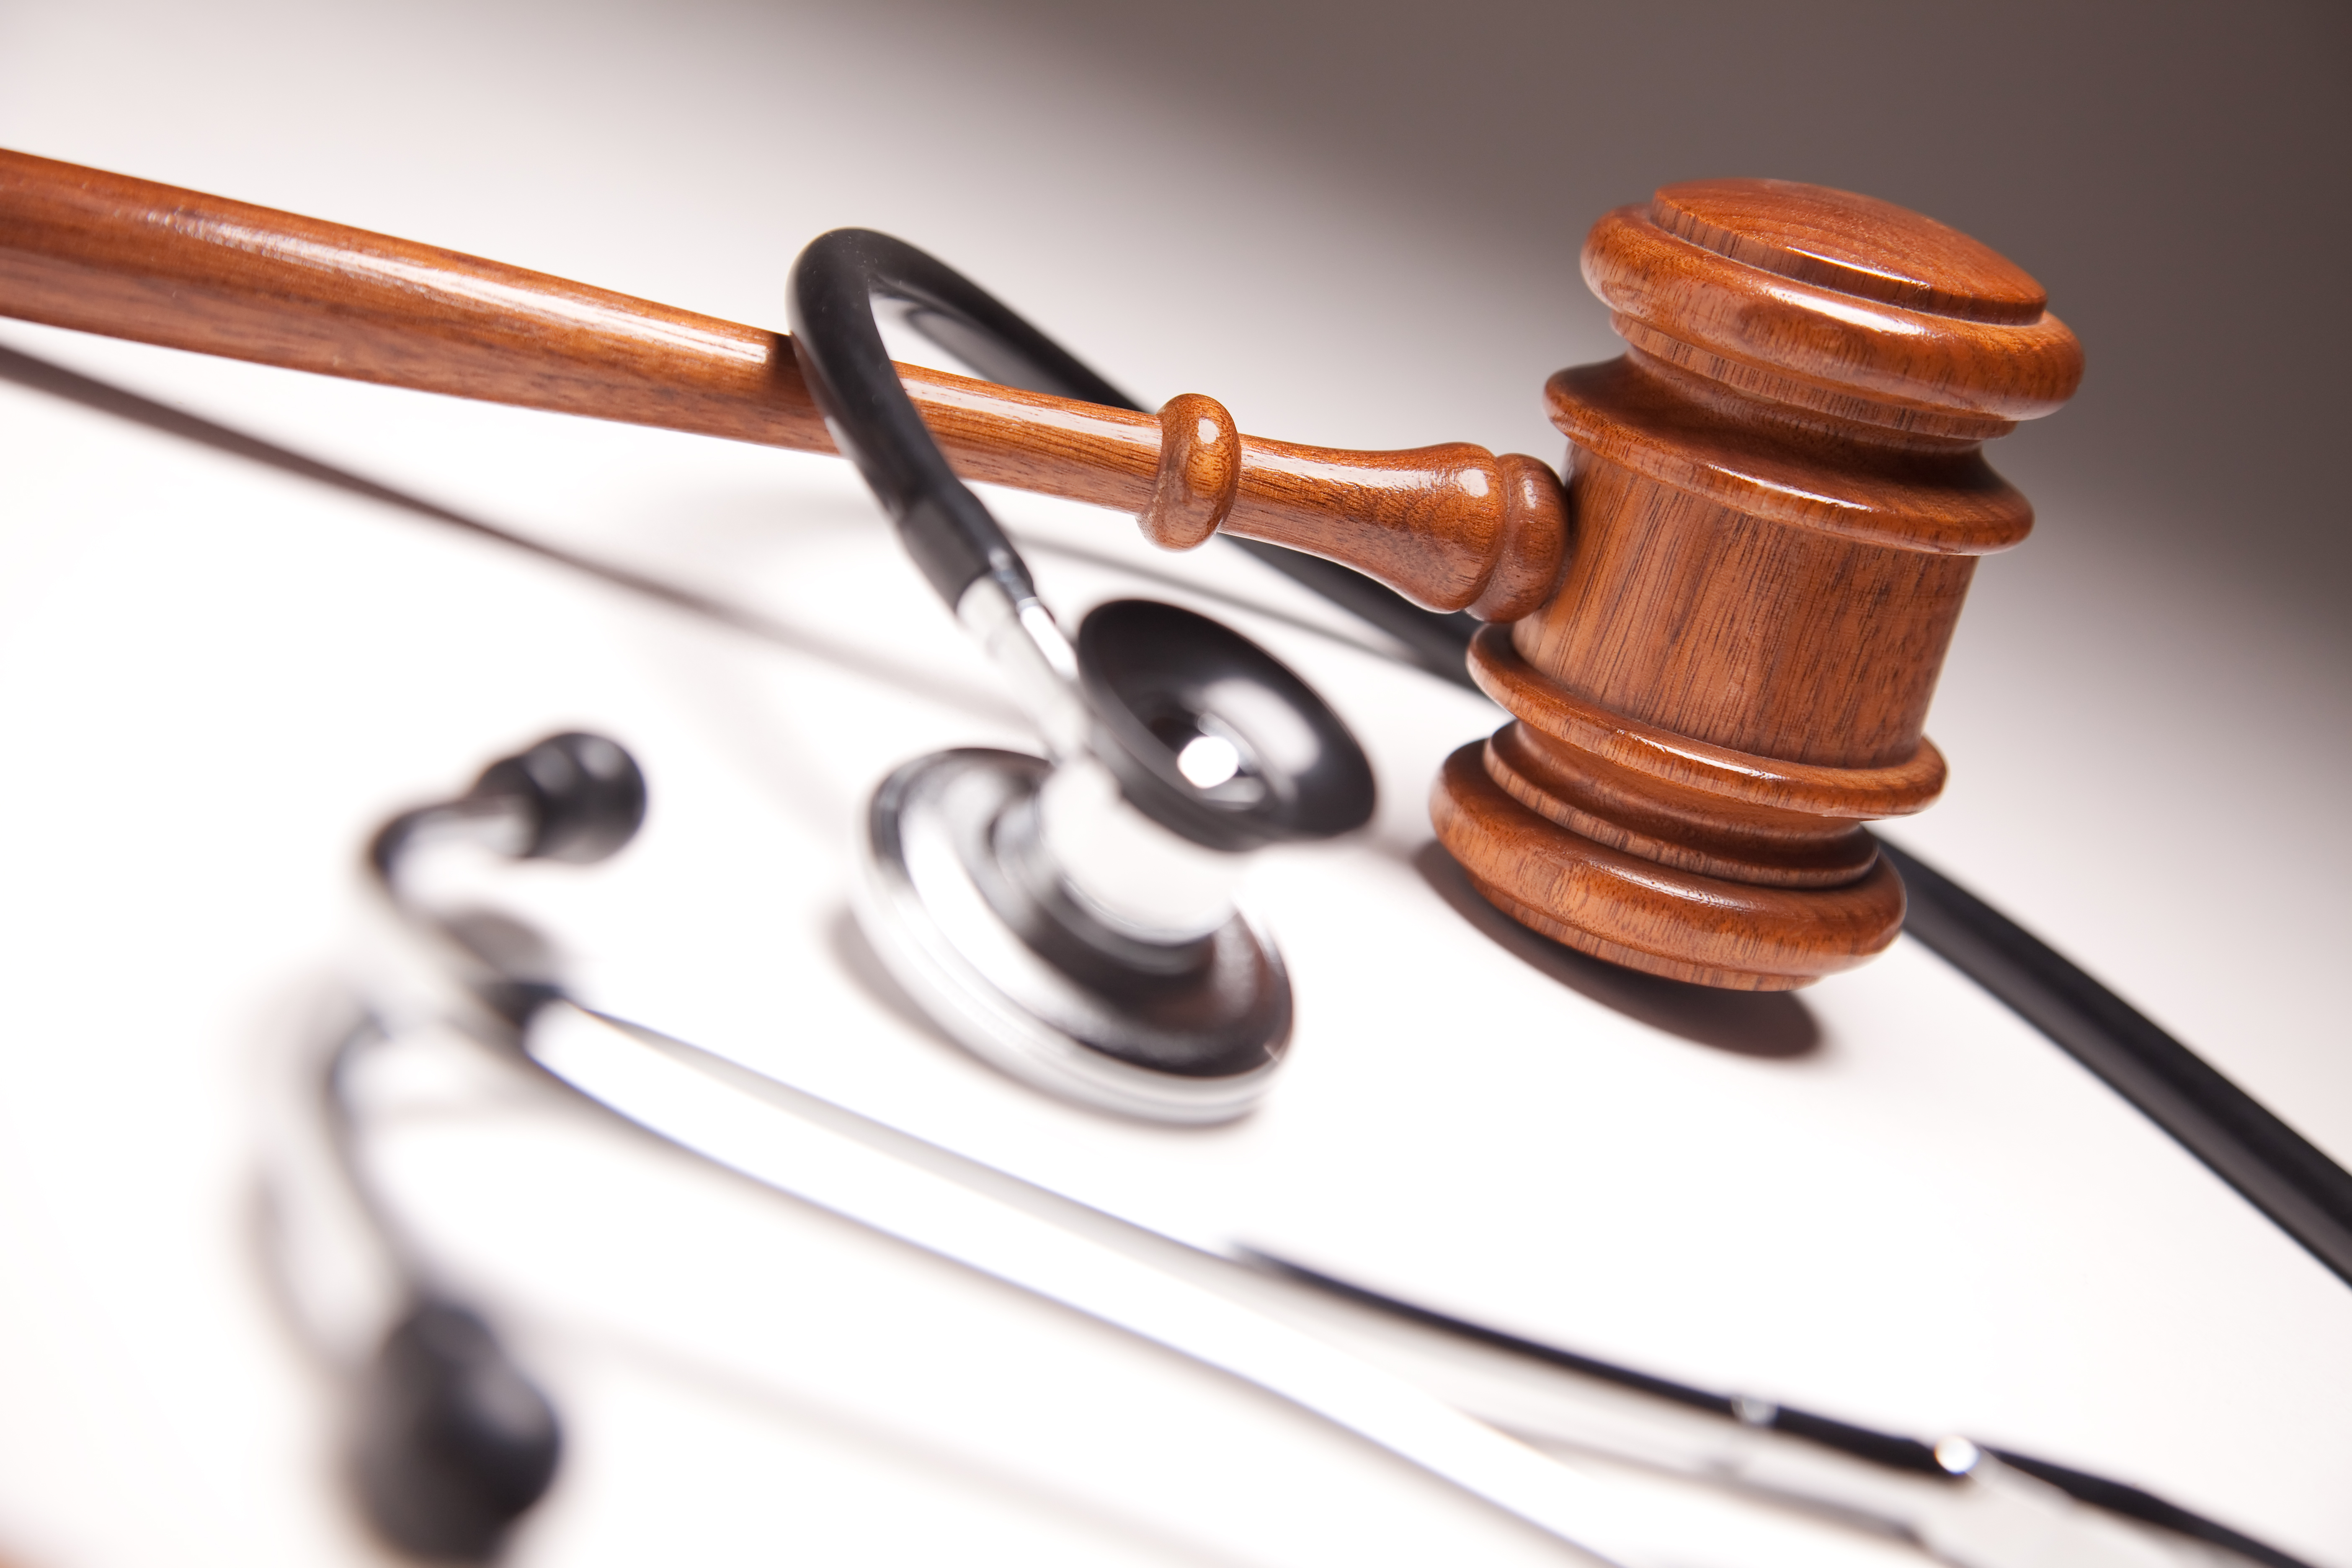 HOW DO I KNOW IF I HAVE A MEDICAL MALPRACTICE SUIT